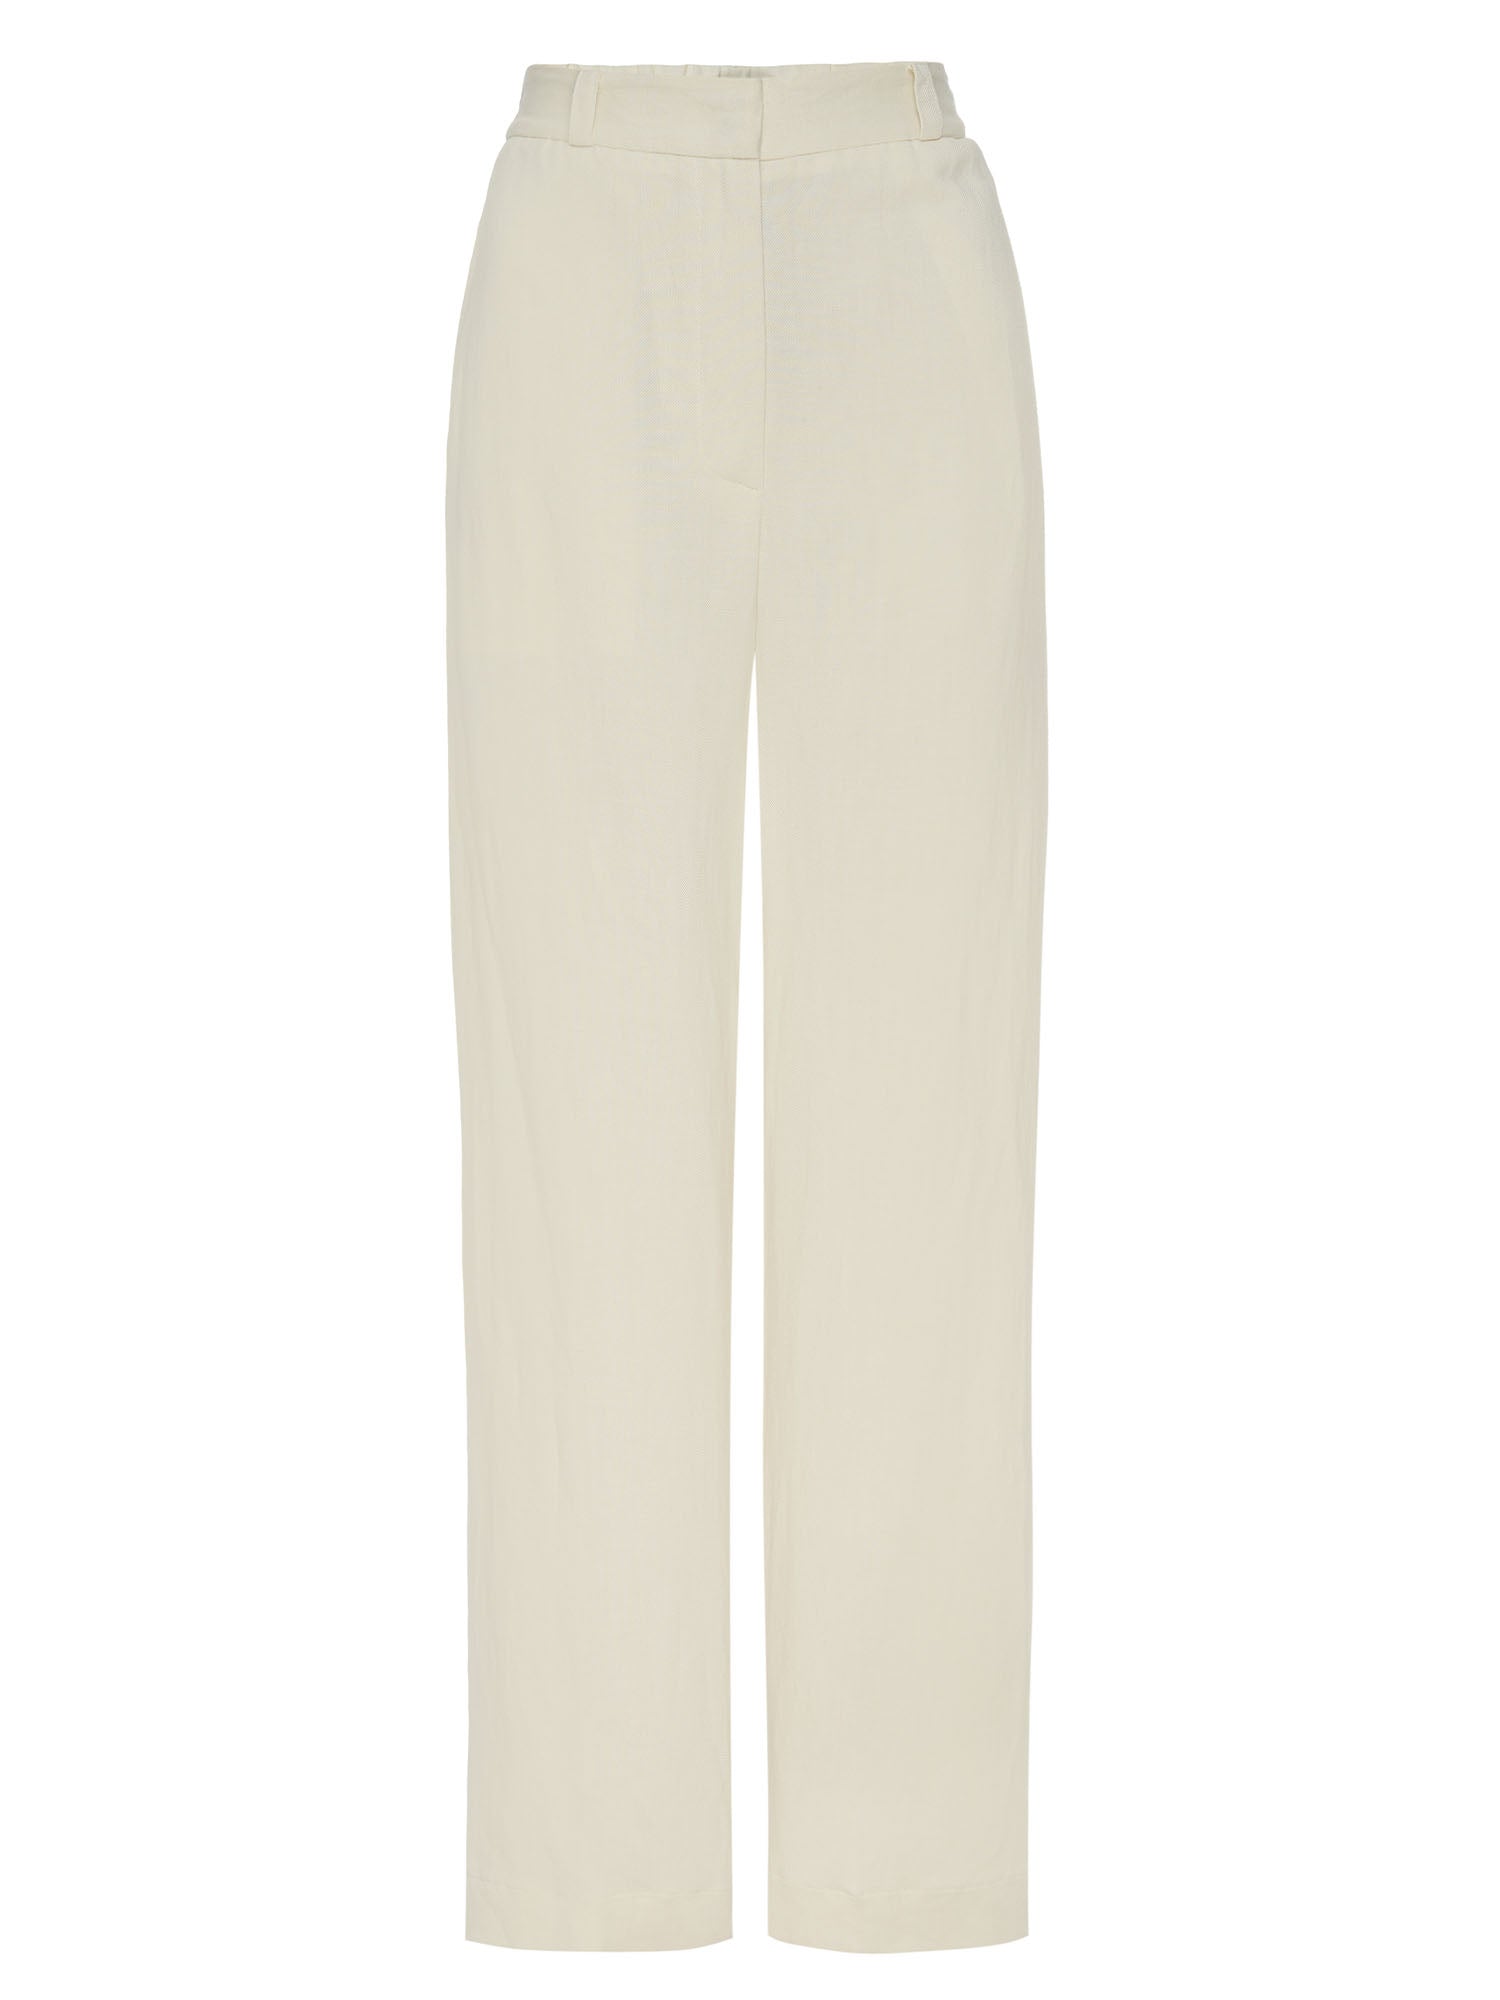 Women's Areo Pant in Egret